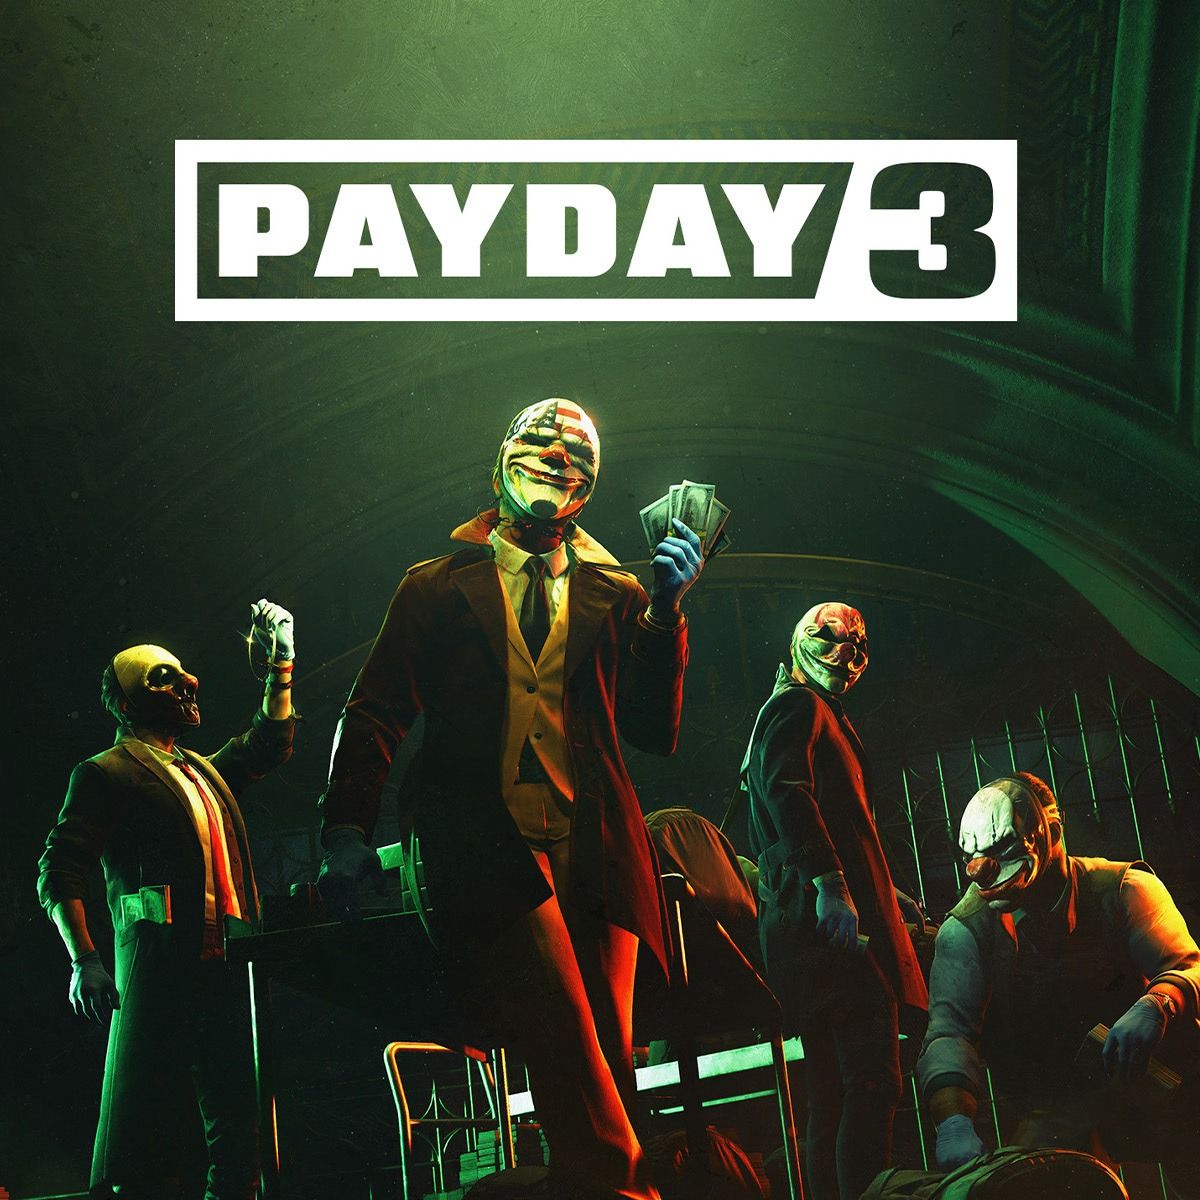 PayDay 3 - Silver Edition Steam Global